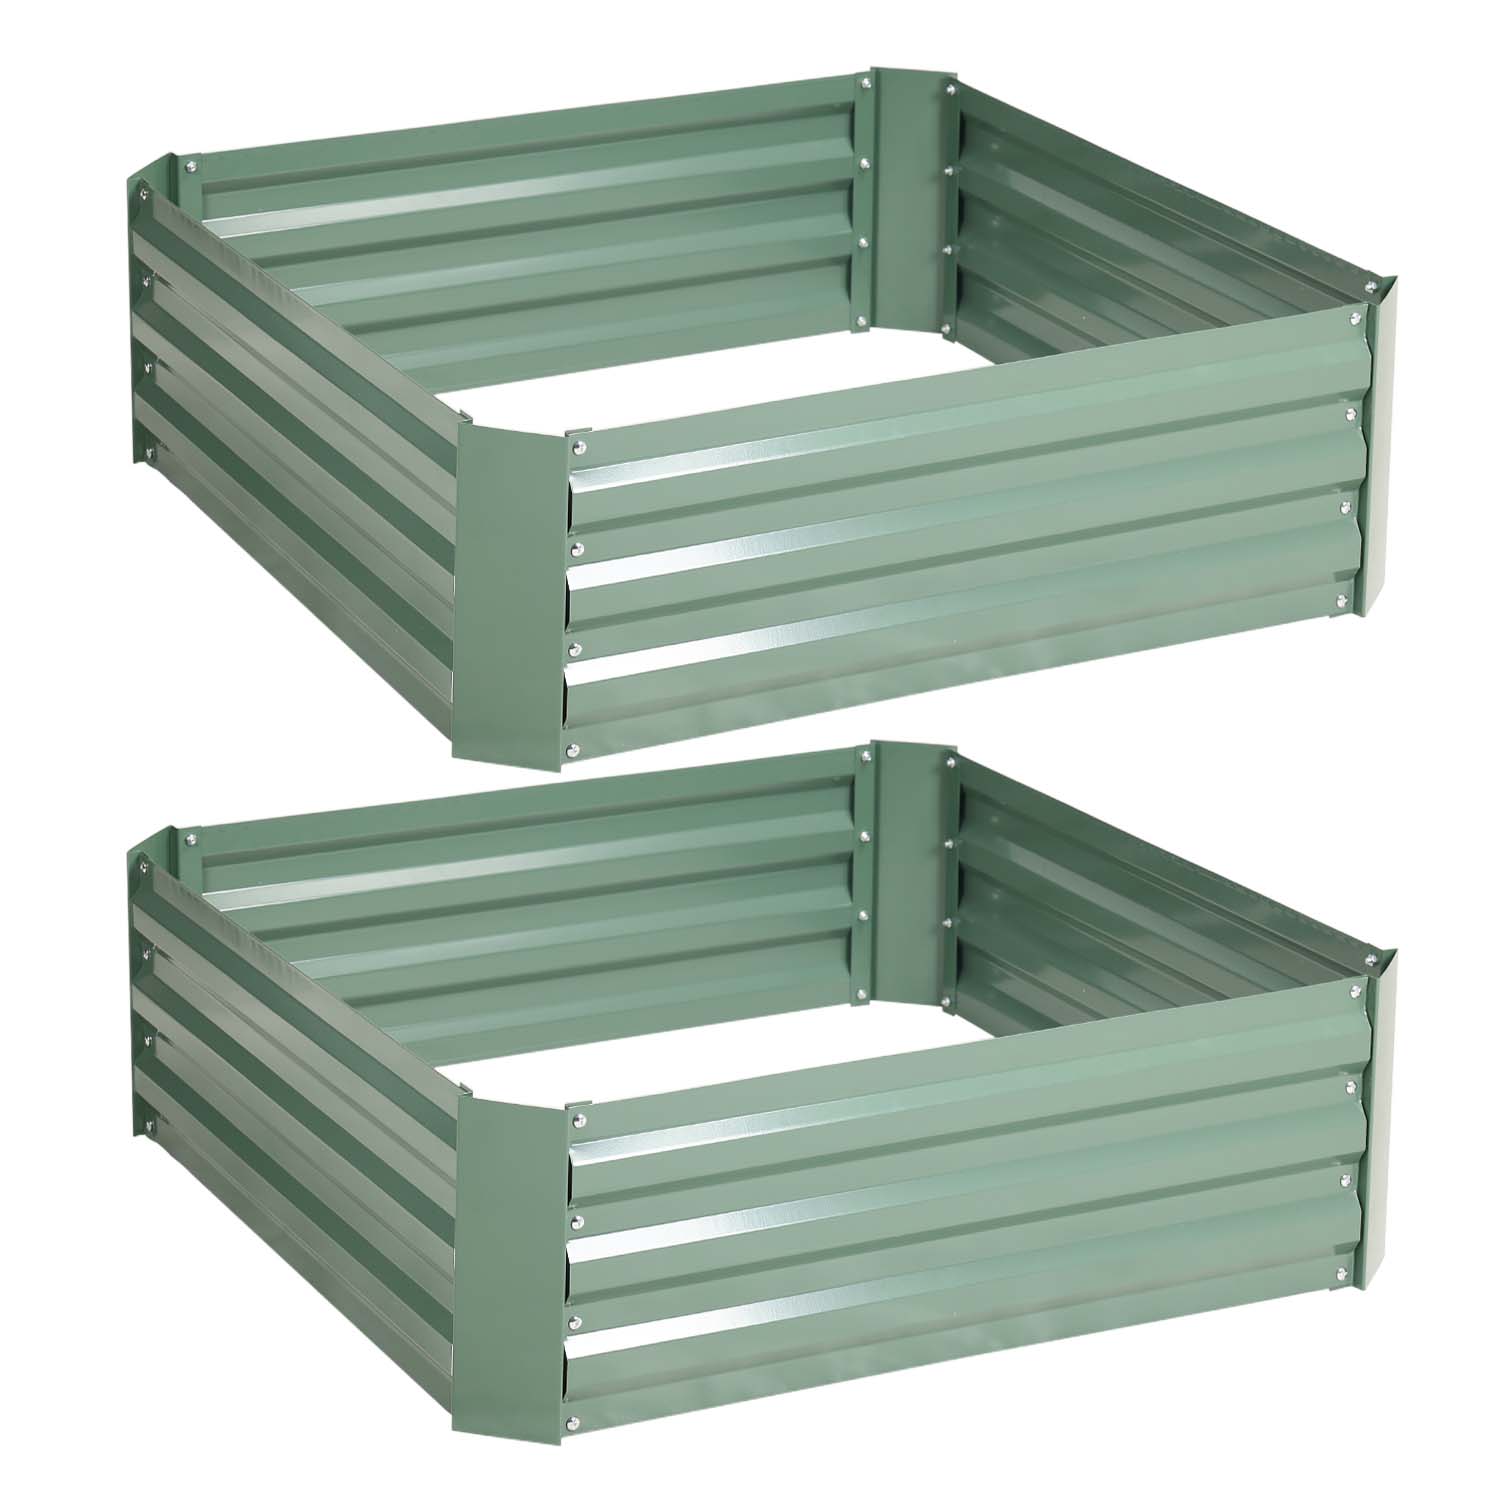 Outdoor Raised Garden Bed 6' x 3' /8' x 4' - Reinforced Galvanized Steel Planter Box for Vegetables, Patio, Outdoor Yard Planter Aoodor   